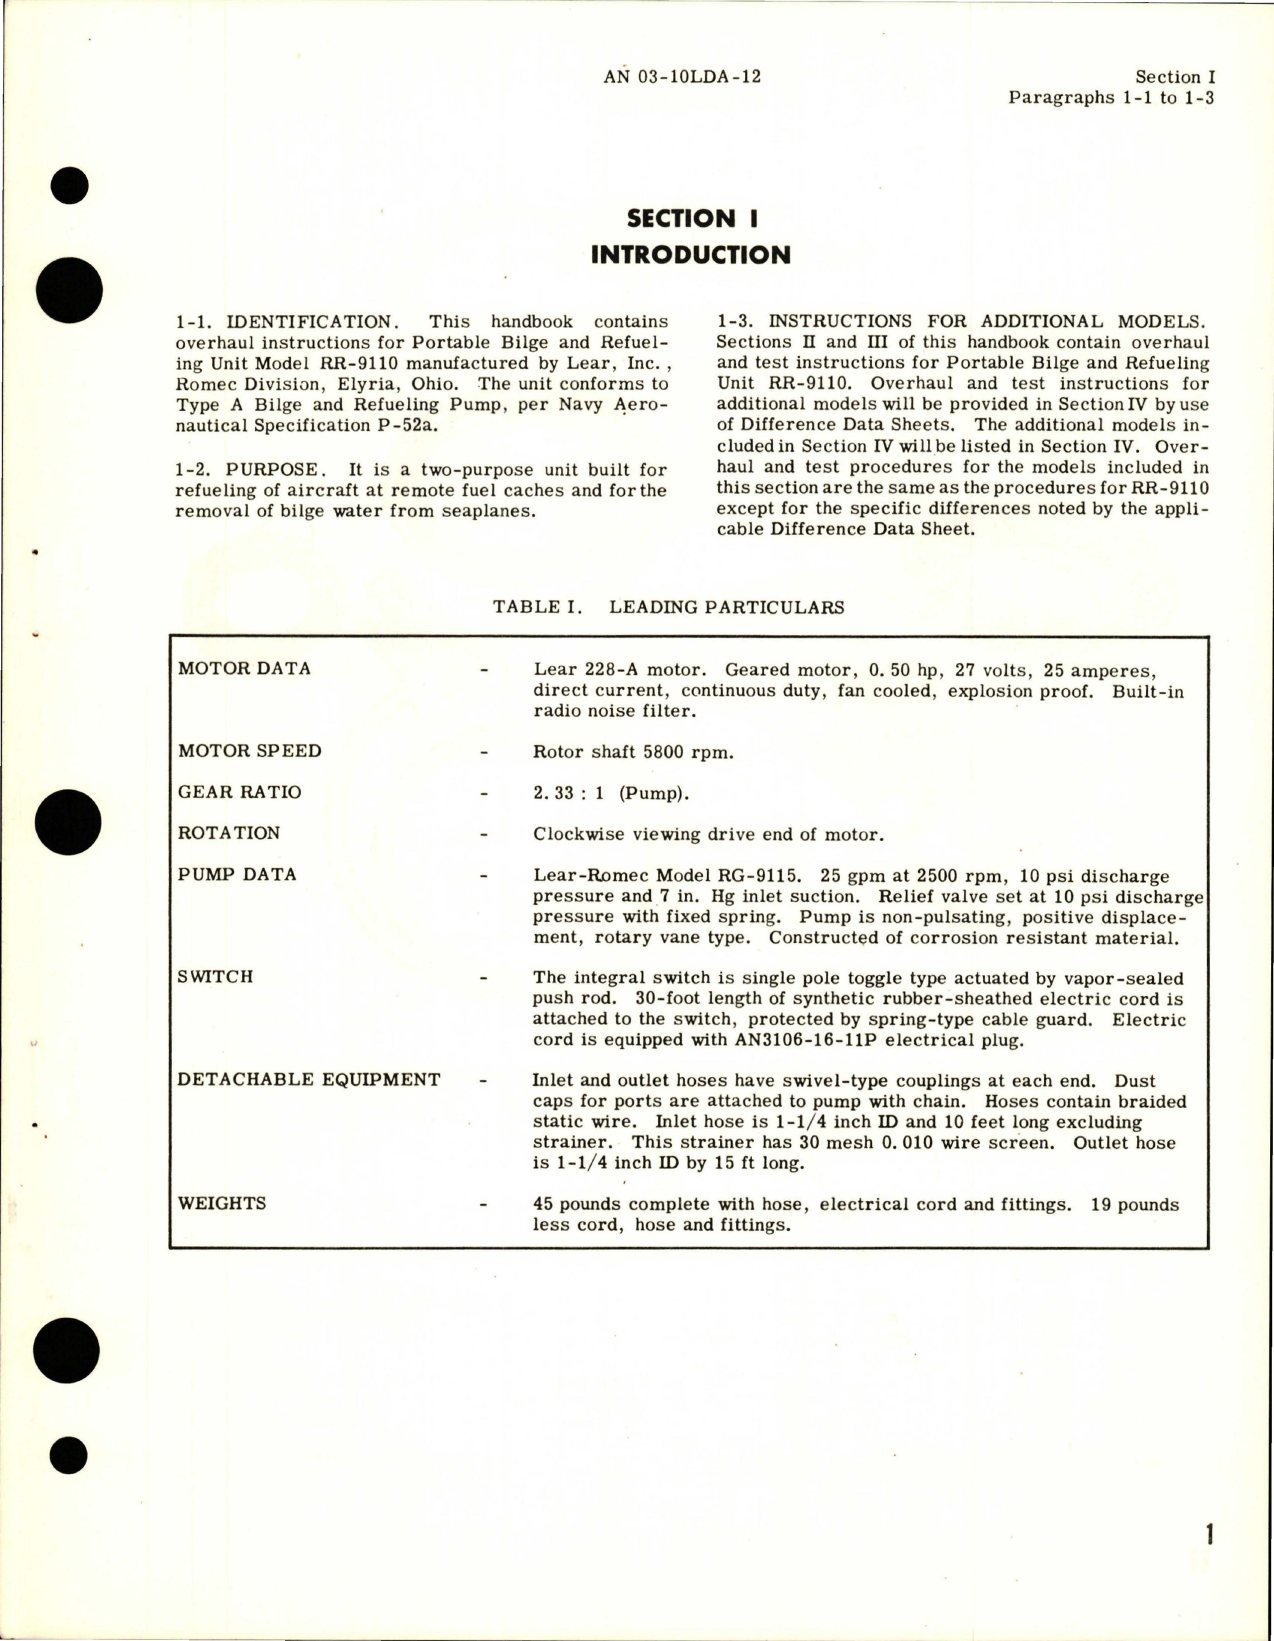 Sample page 5 from AirCorps Library document: Overhaul Instructions for Portable Bilge & Refueling Unit - Model RR-9110